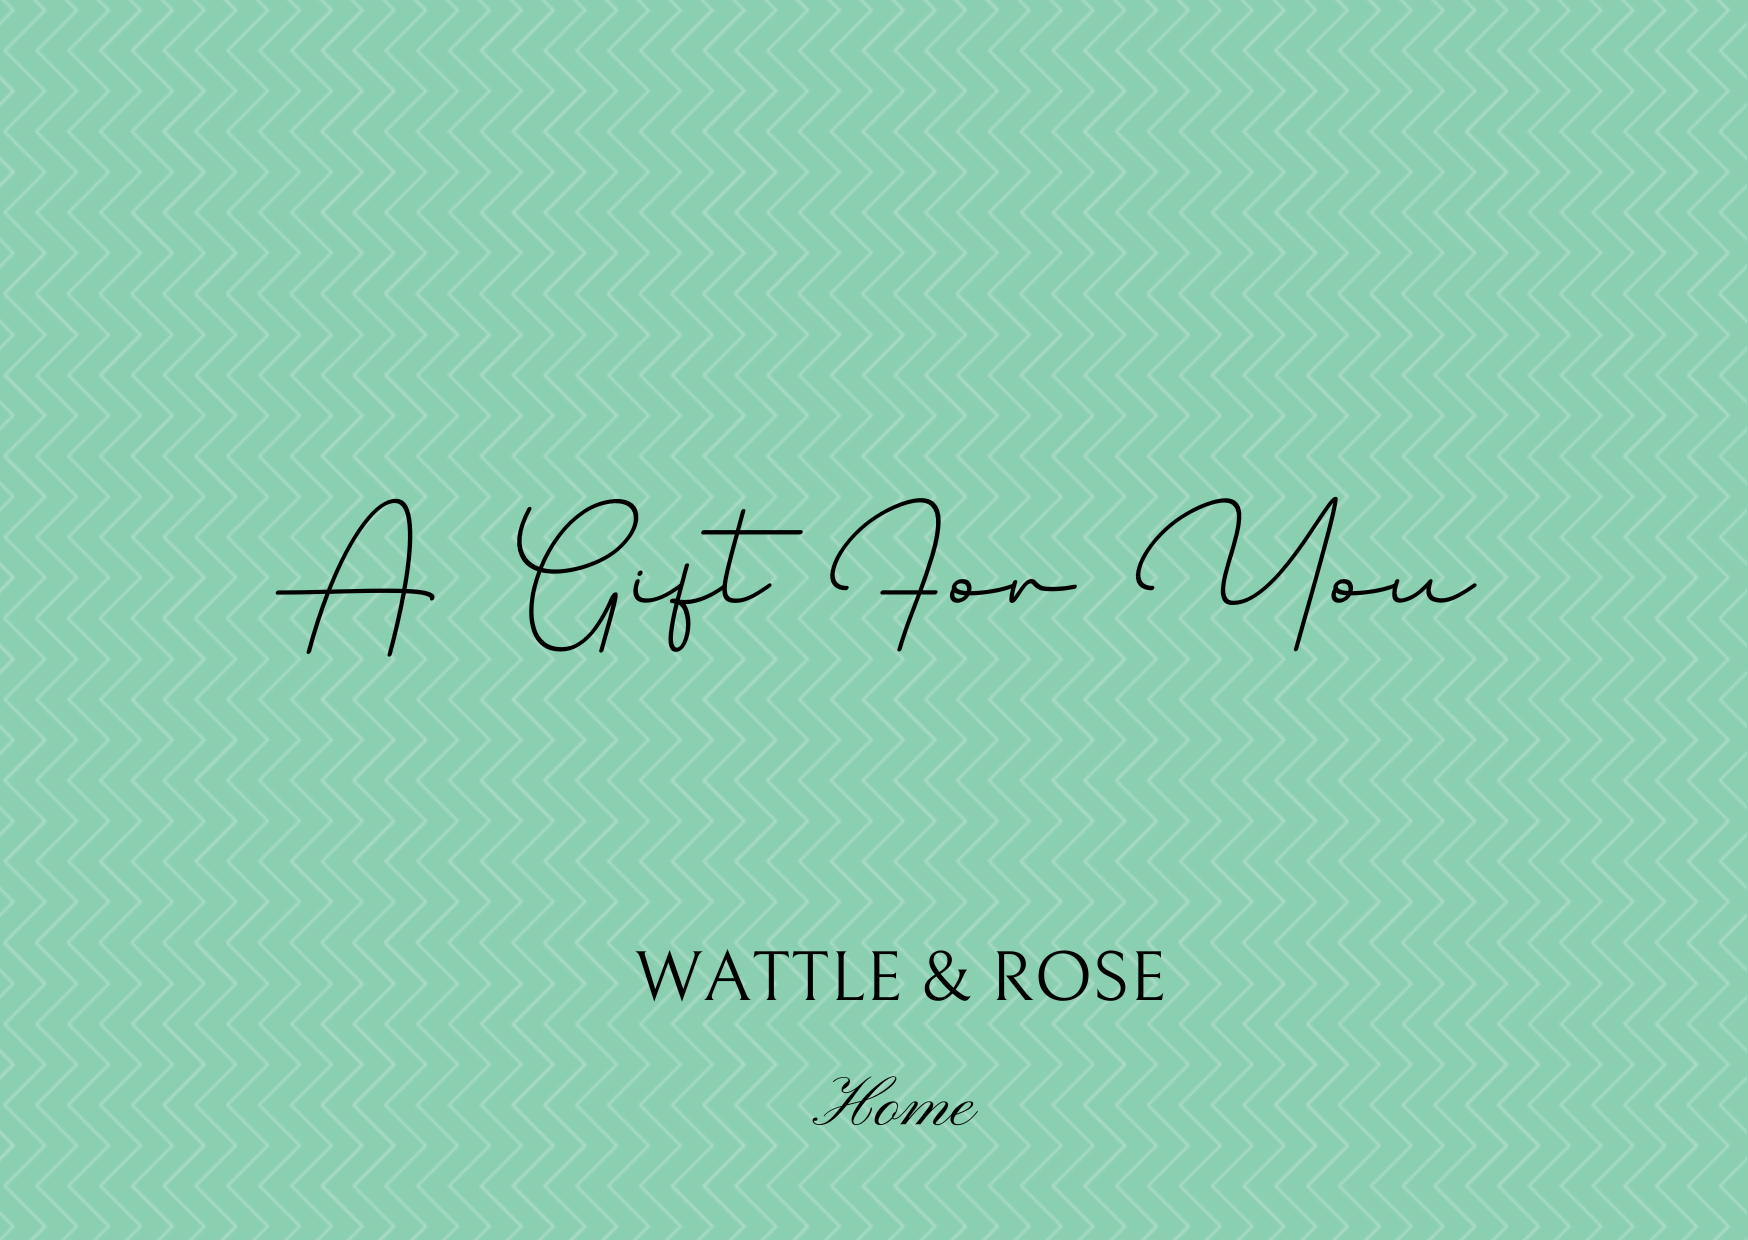 Wattle & Rose Home Gift Card